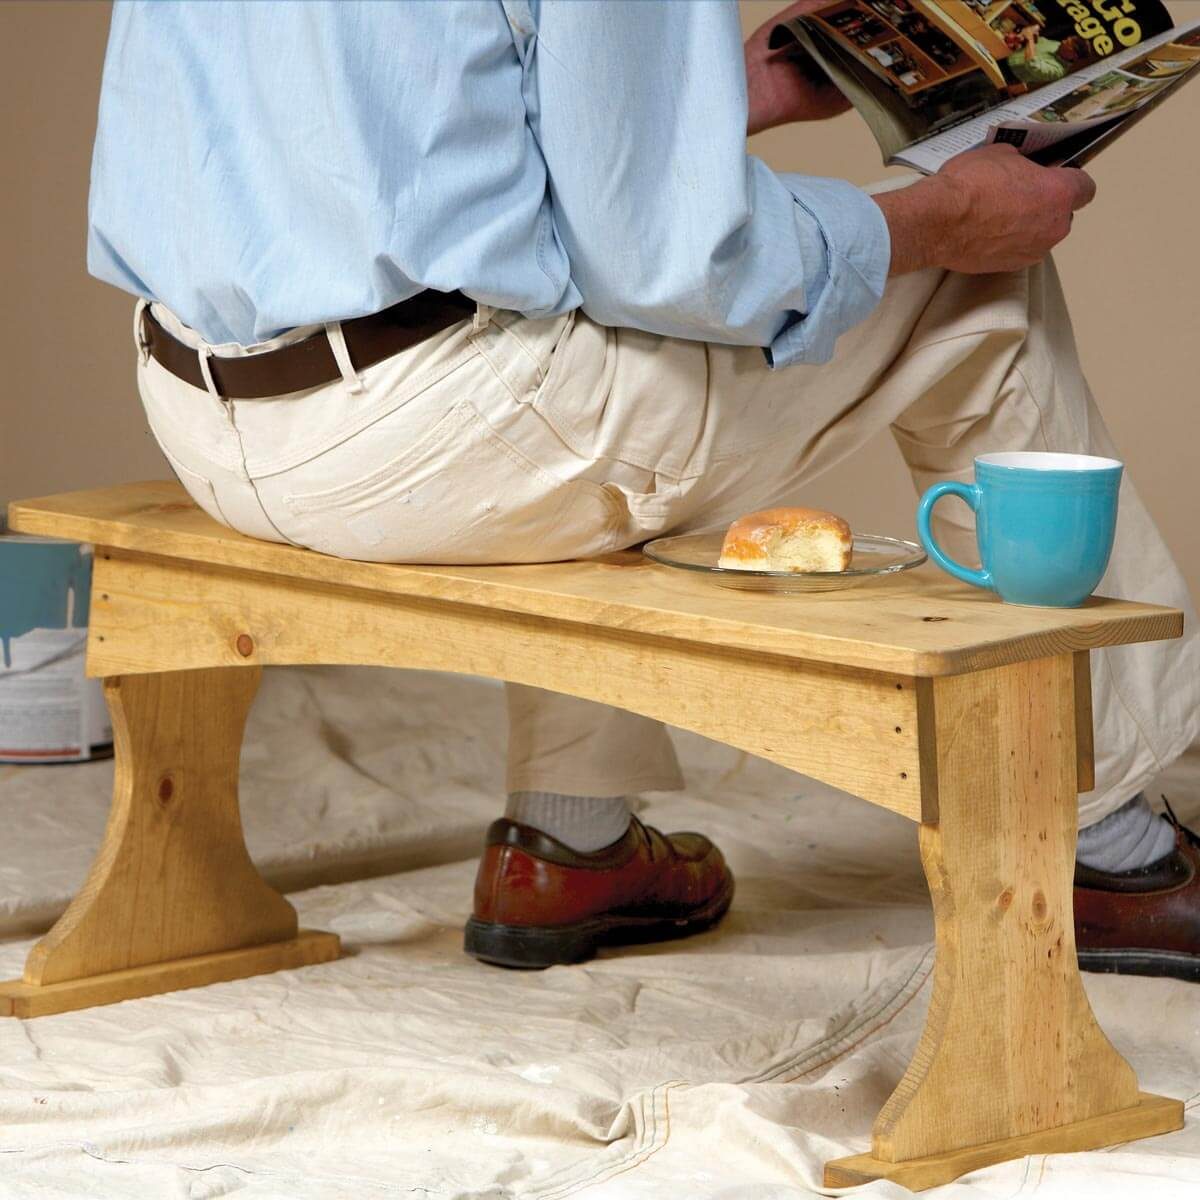 woodworking projects videos